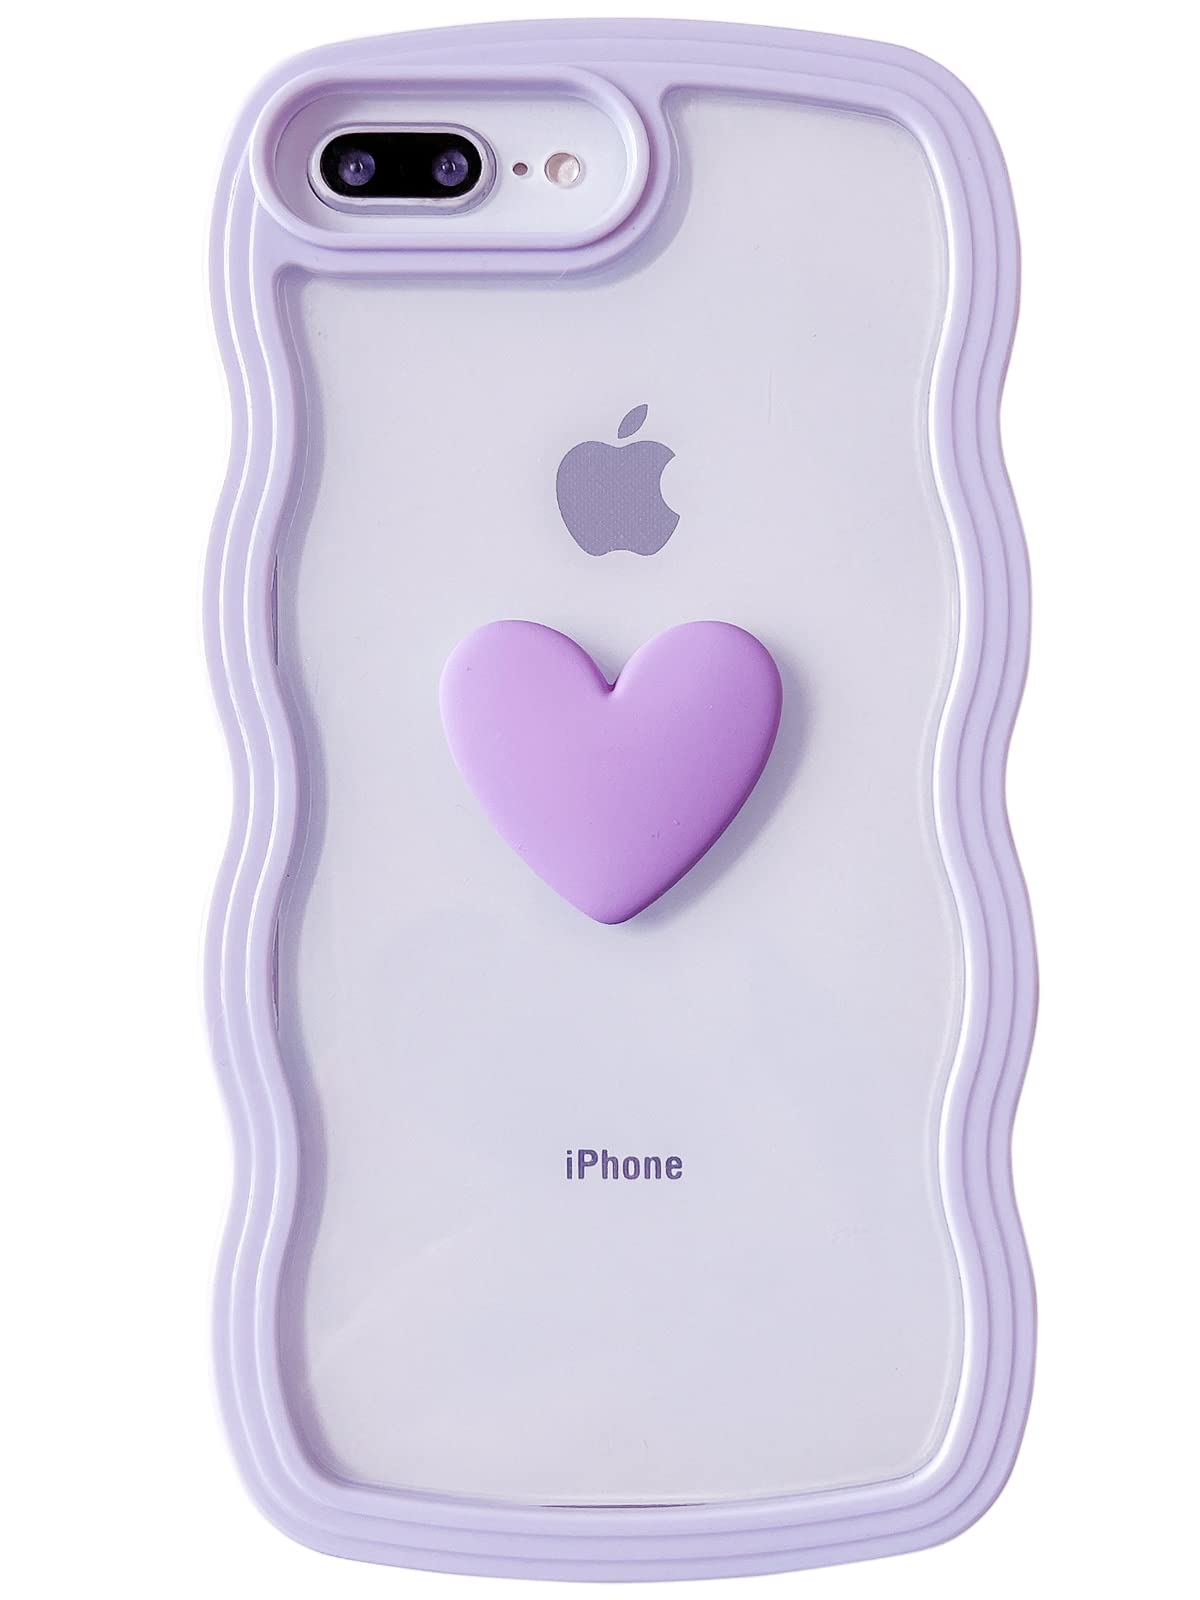 Qokey for iPhone 8 Plus Case,iPhone 7 Plus Case,Cute Clear 3D Love Heart Wavy Frame Full Protection for iPhone 7 Plus & 8 Plus 5.5